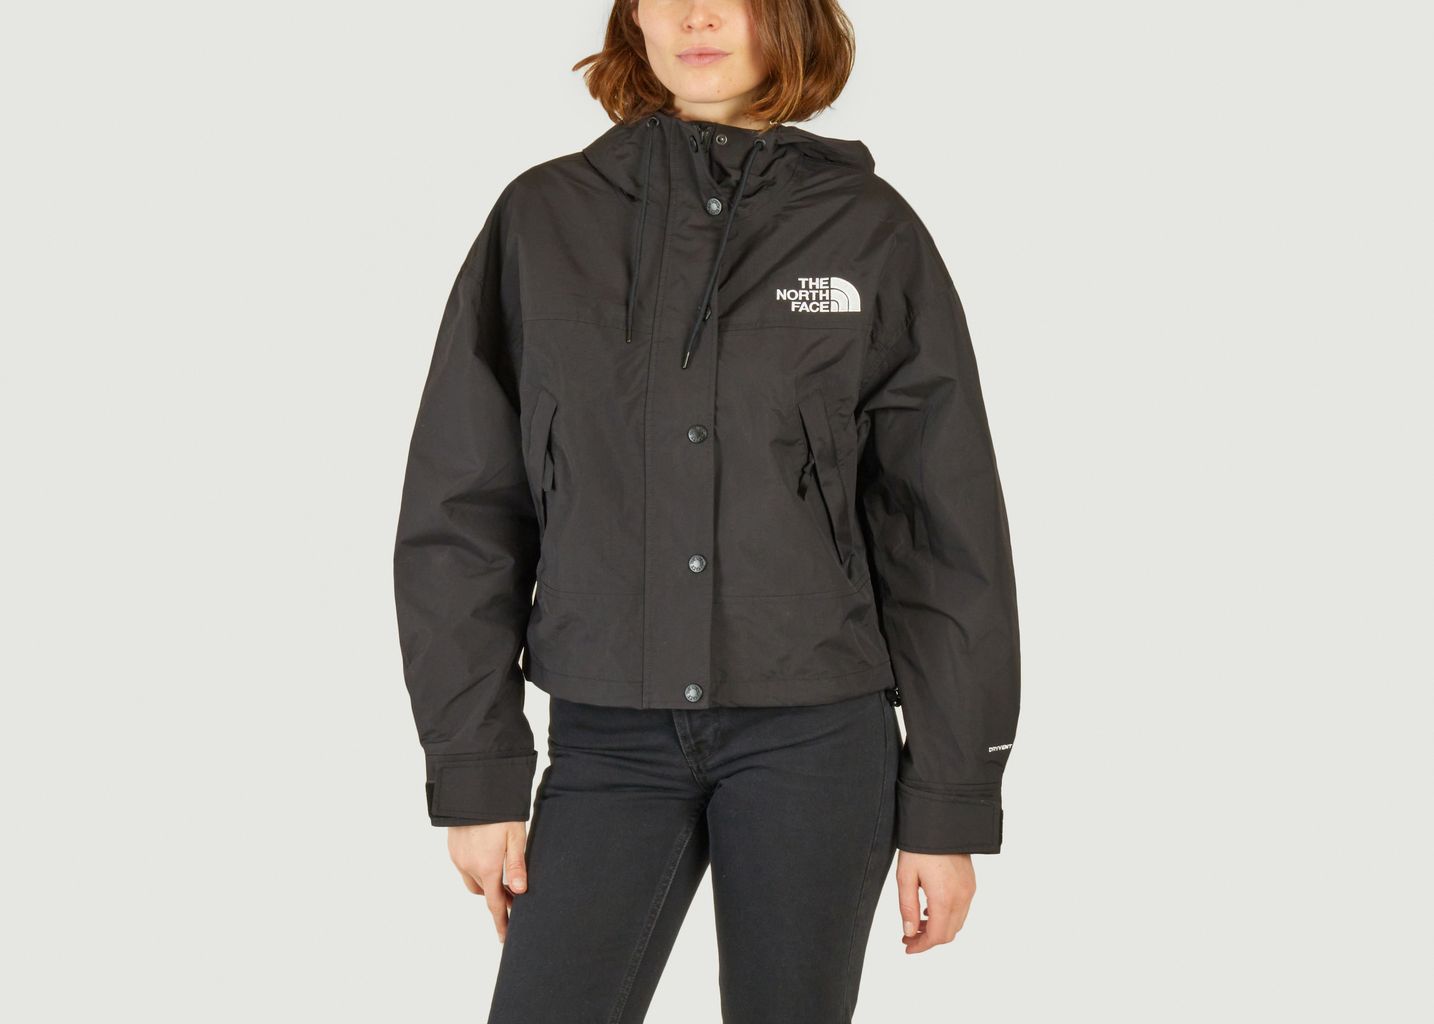 Reign On Jacket - The North Face